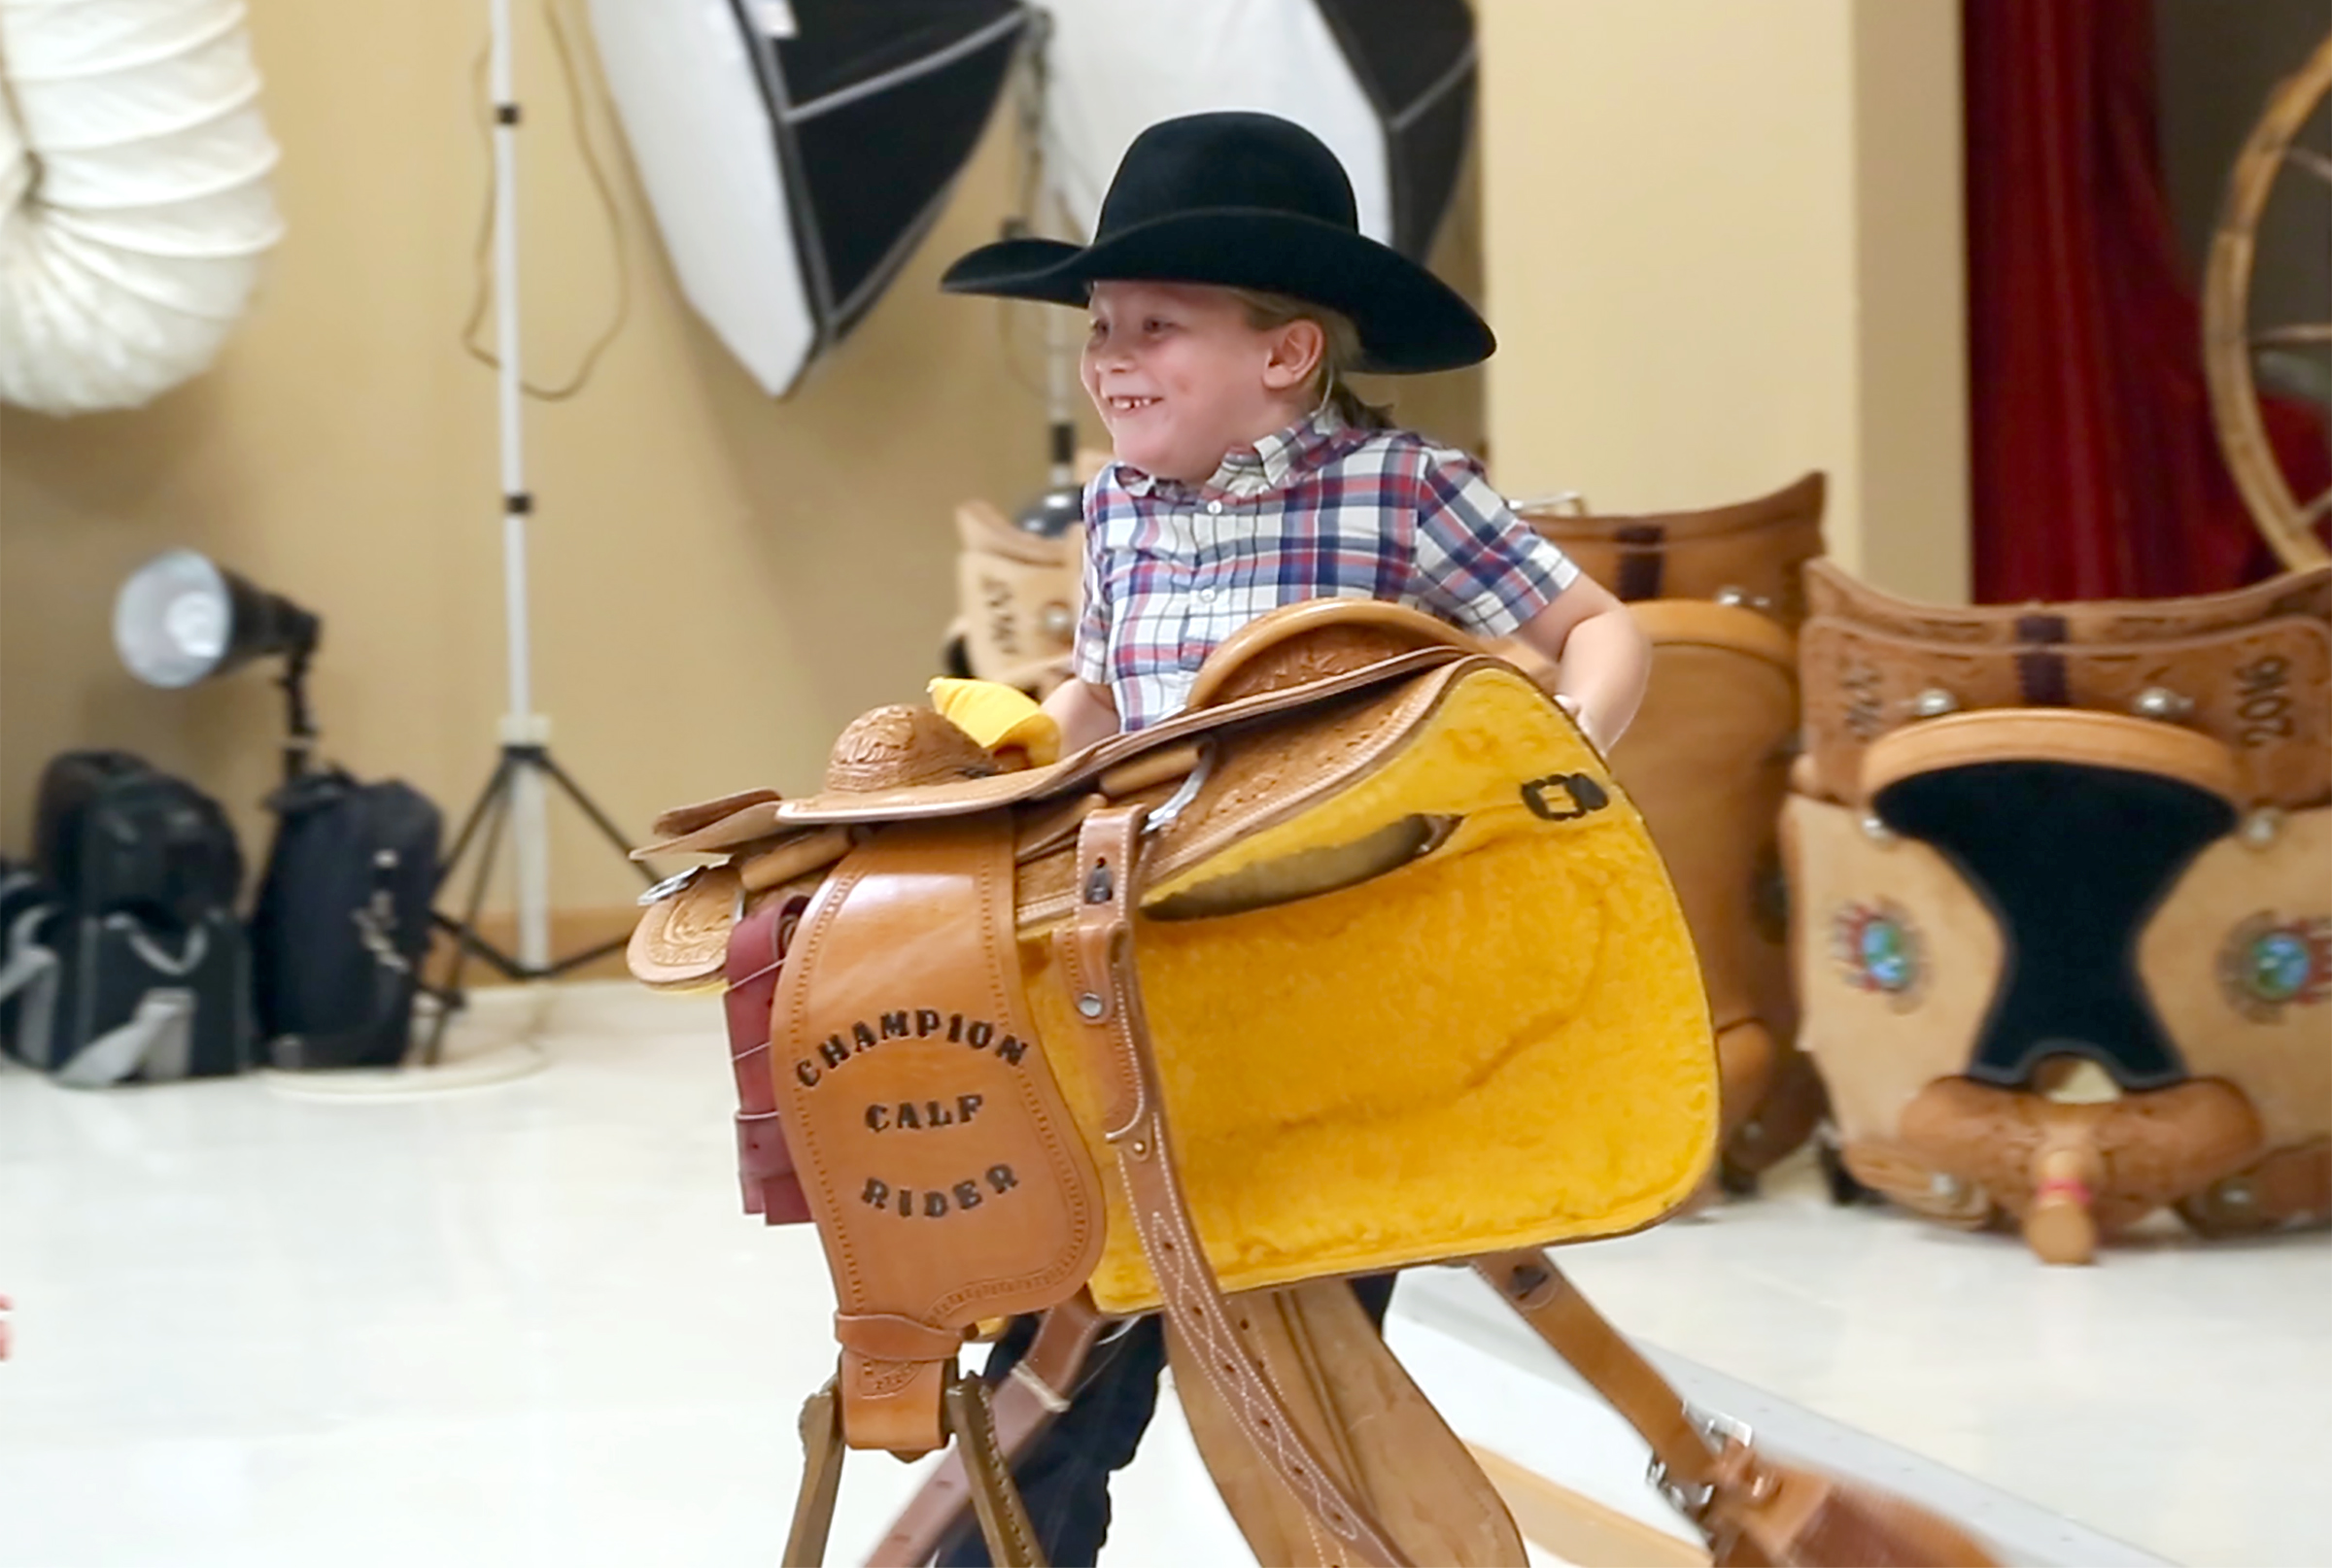 Jace Johns proudly carries the saddle he won as the EIRA youth calf riding champion. (Carlos Fuentes photo)